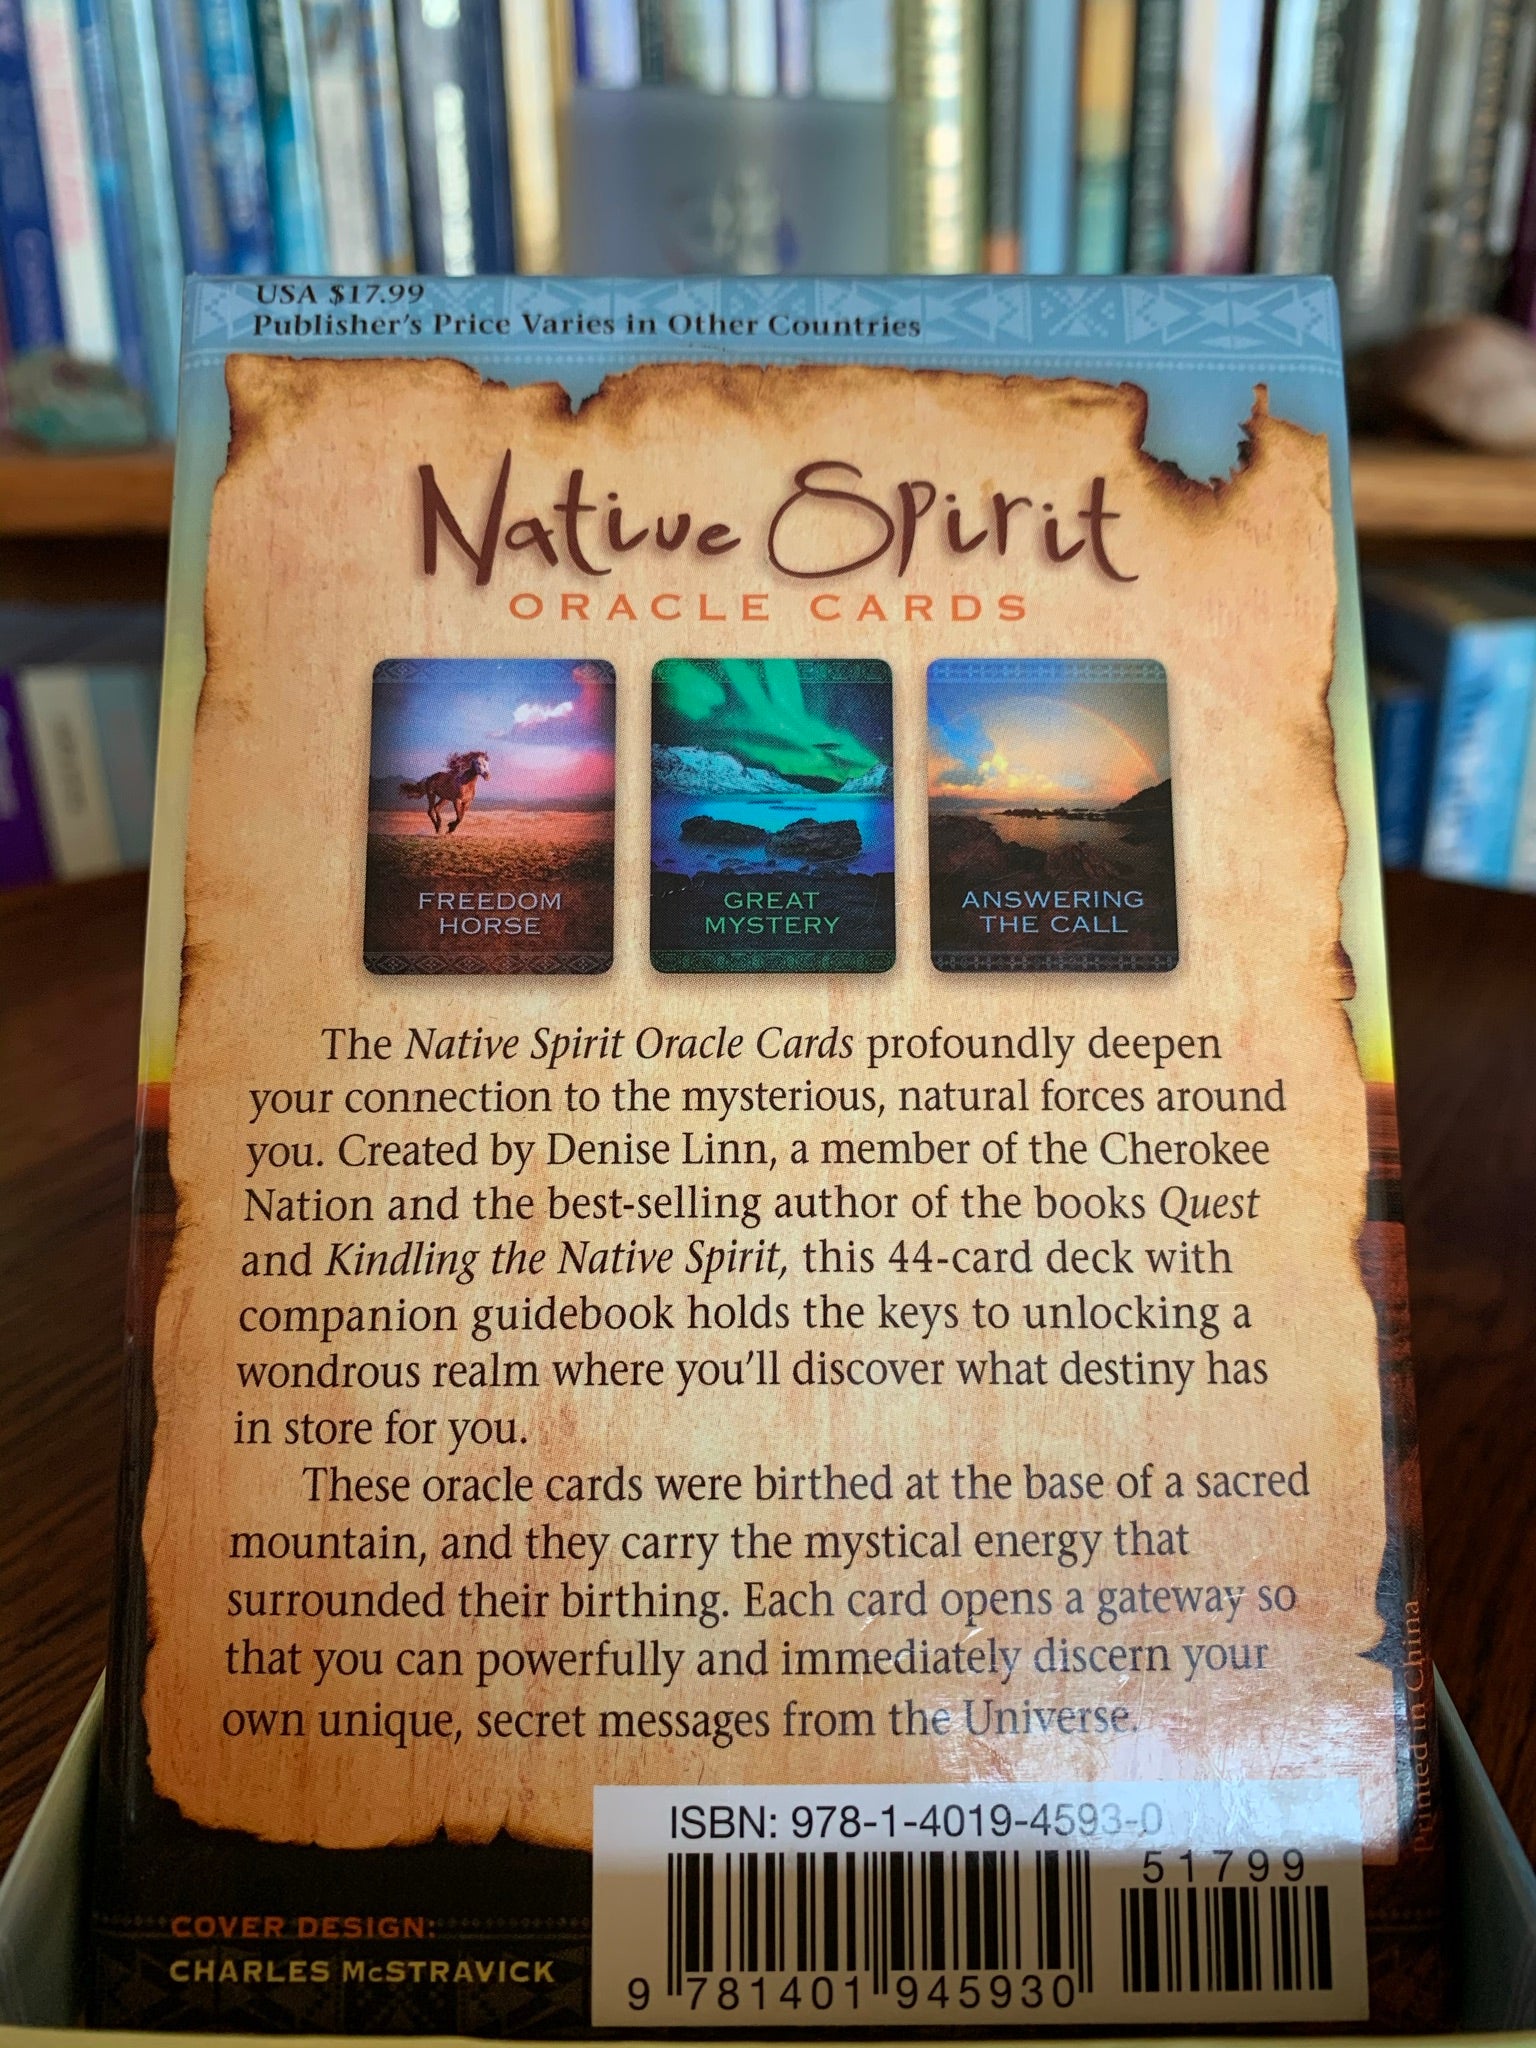 Close-up view - back of the box for the Native Spirit Oracle Cards. The deck includes 44 cards, a guidebook and box for storage. This is a personal favorite of mine. The art is beautiful and the card description has 3 parts: "Card Meaning," "Your Native Spirit Wants You To Know," and "The Journey." Denise Linn, the author, is a member of the Cherokee Nation, is a best-selling author and she created these cards at the base of a sacred mountain. Price is $18.99.